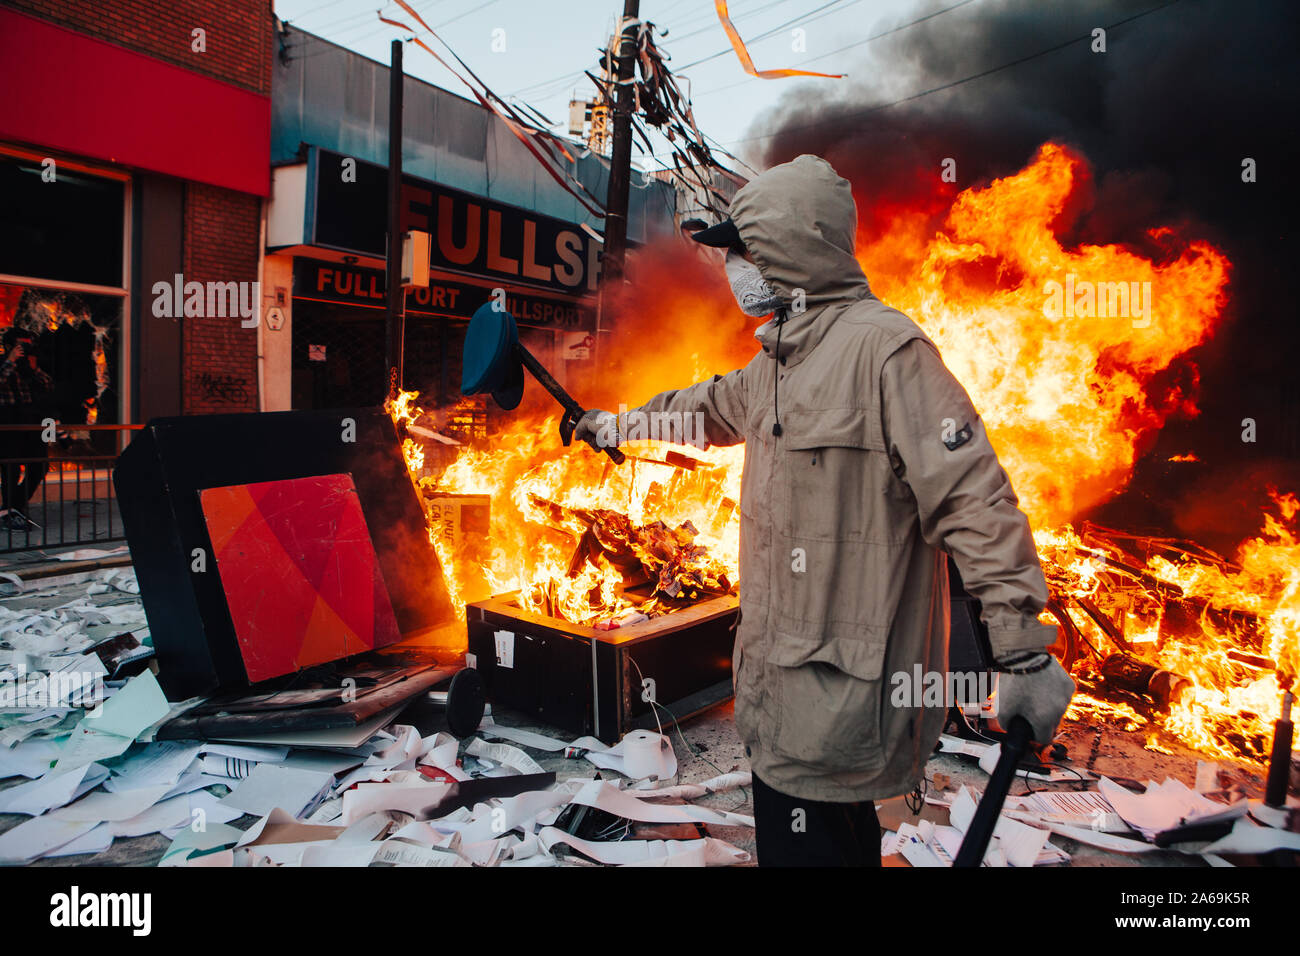 QUILPUE, CHILE - OCTOBER 20, 2019 - Protester poses with part of a uniform looted from a Bank during the protests of the 'Evade' movement against the Stock Photo